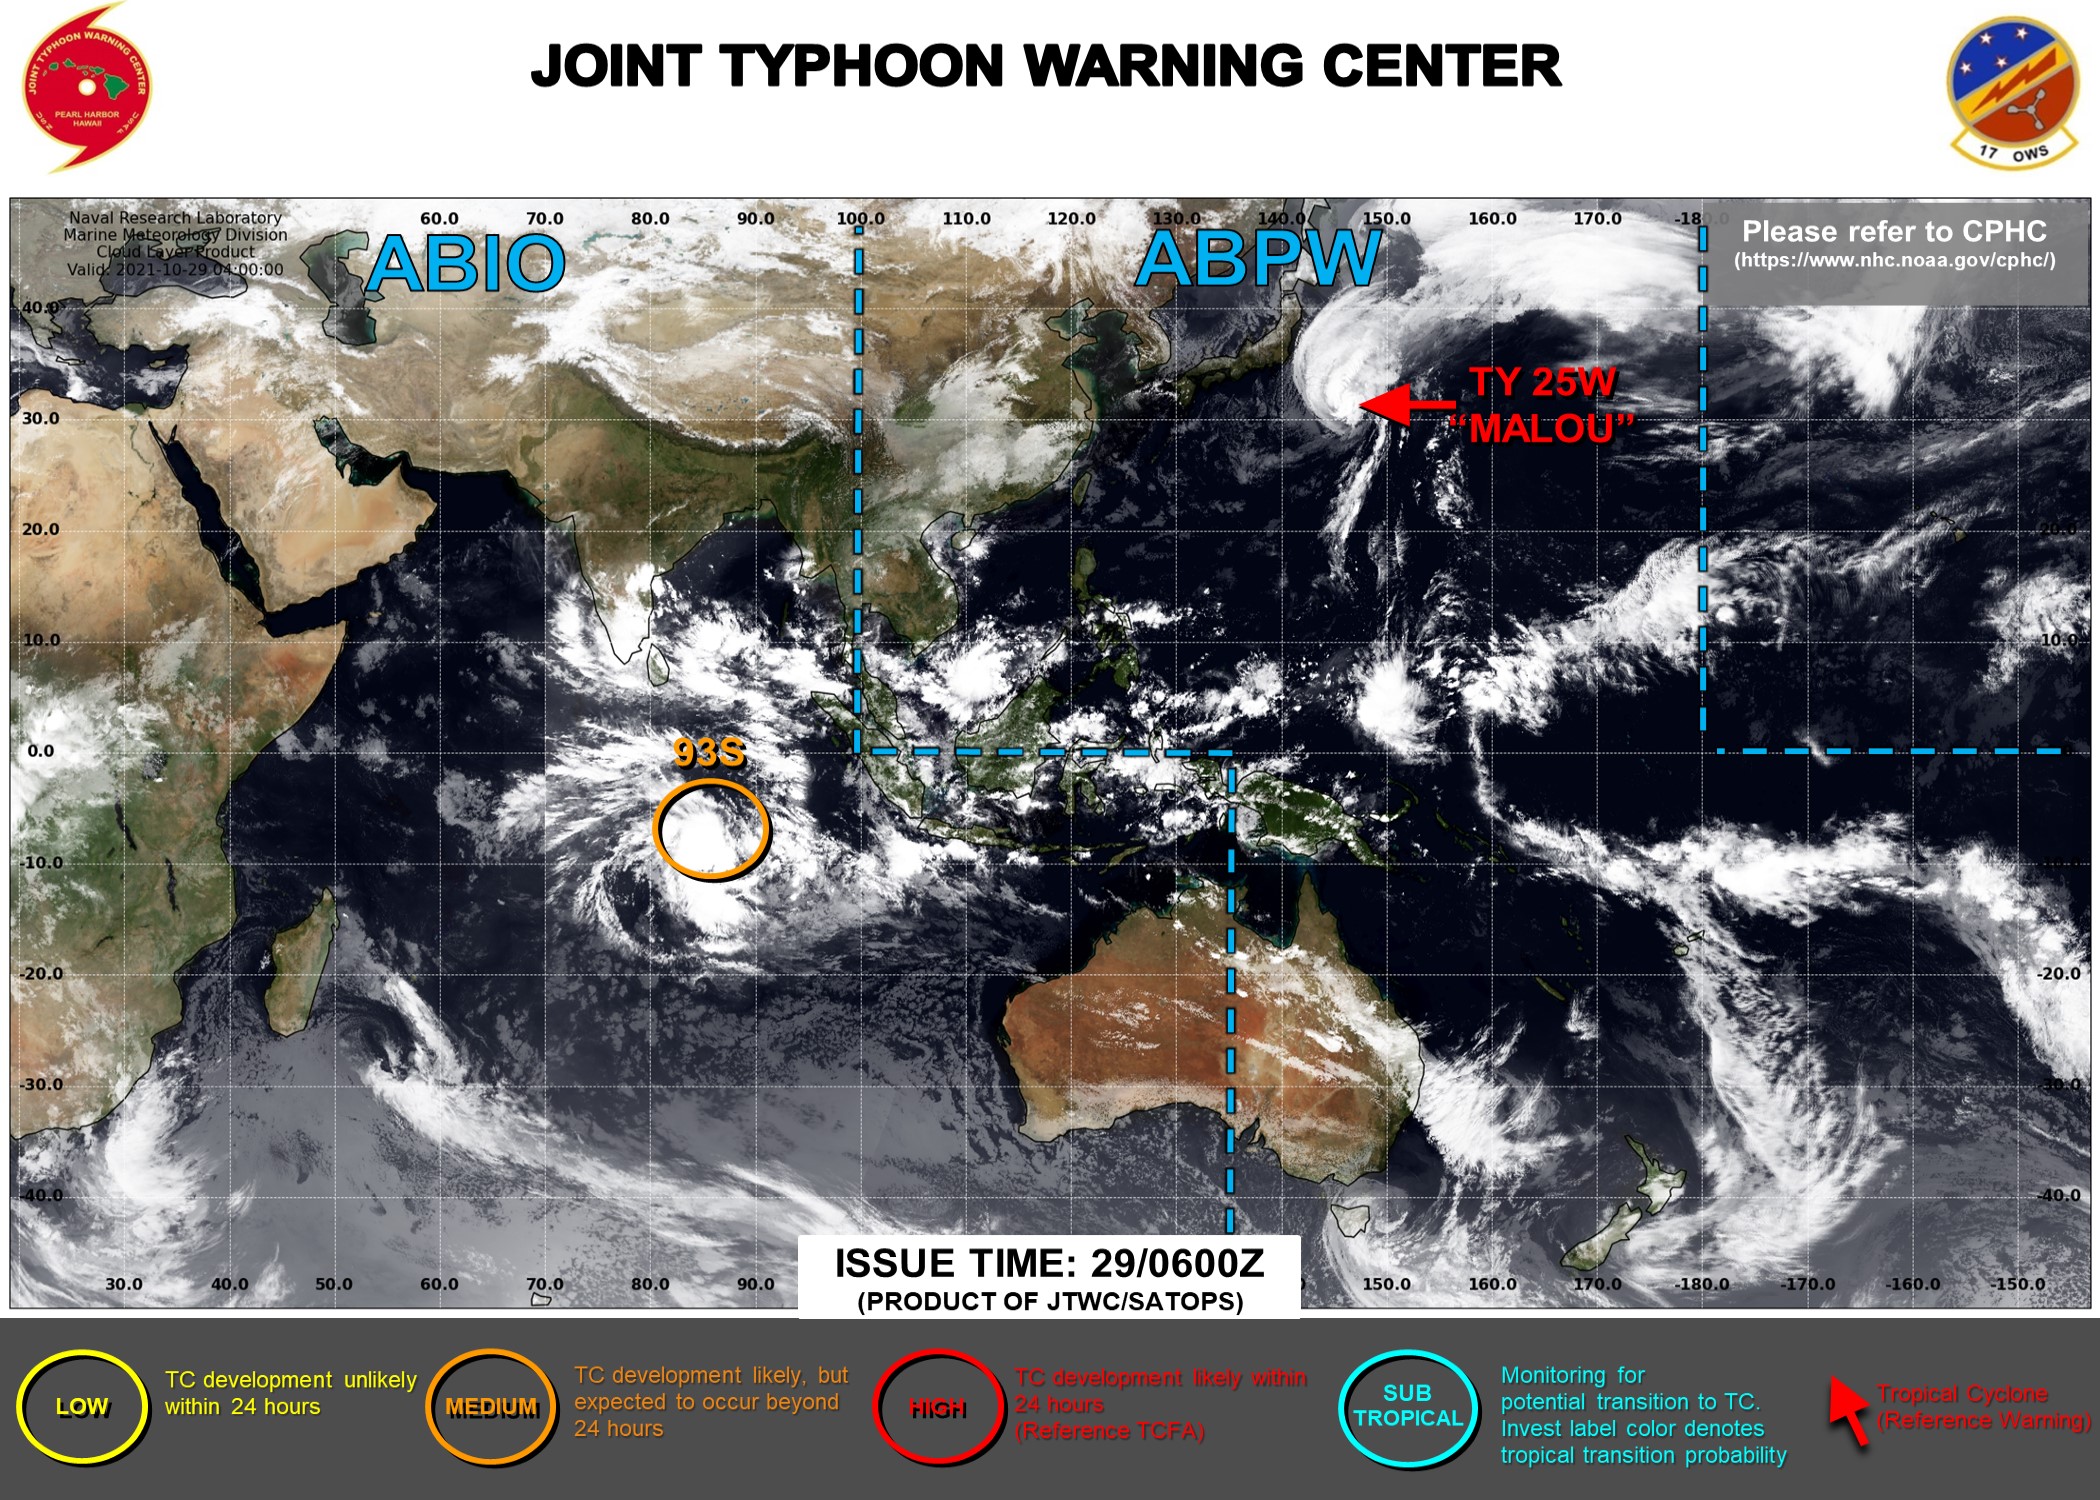 JTWC IS ISSUING 6HOURLY WARNINGS ON 25W. 3HOURLY SATELLITE BULLETINS ARE ISSUED FOR 25W AND 93S.